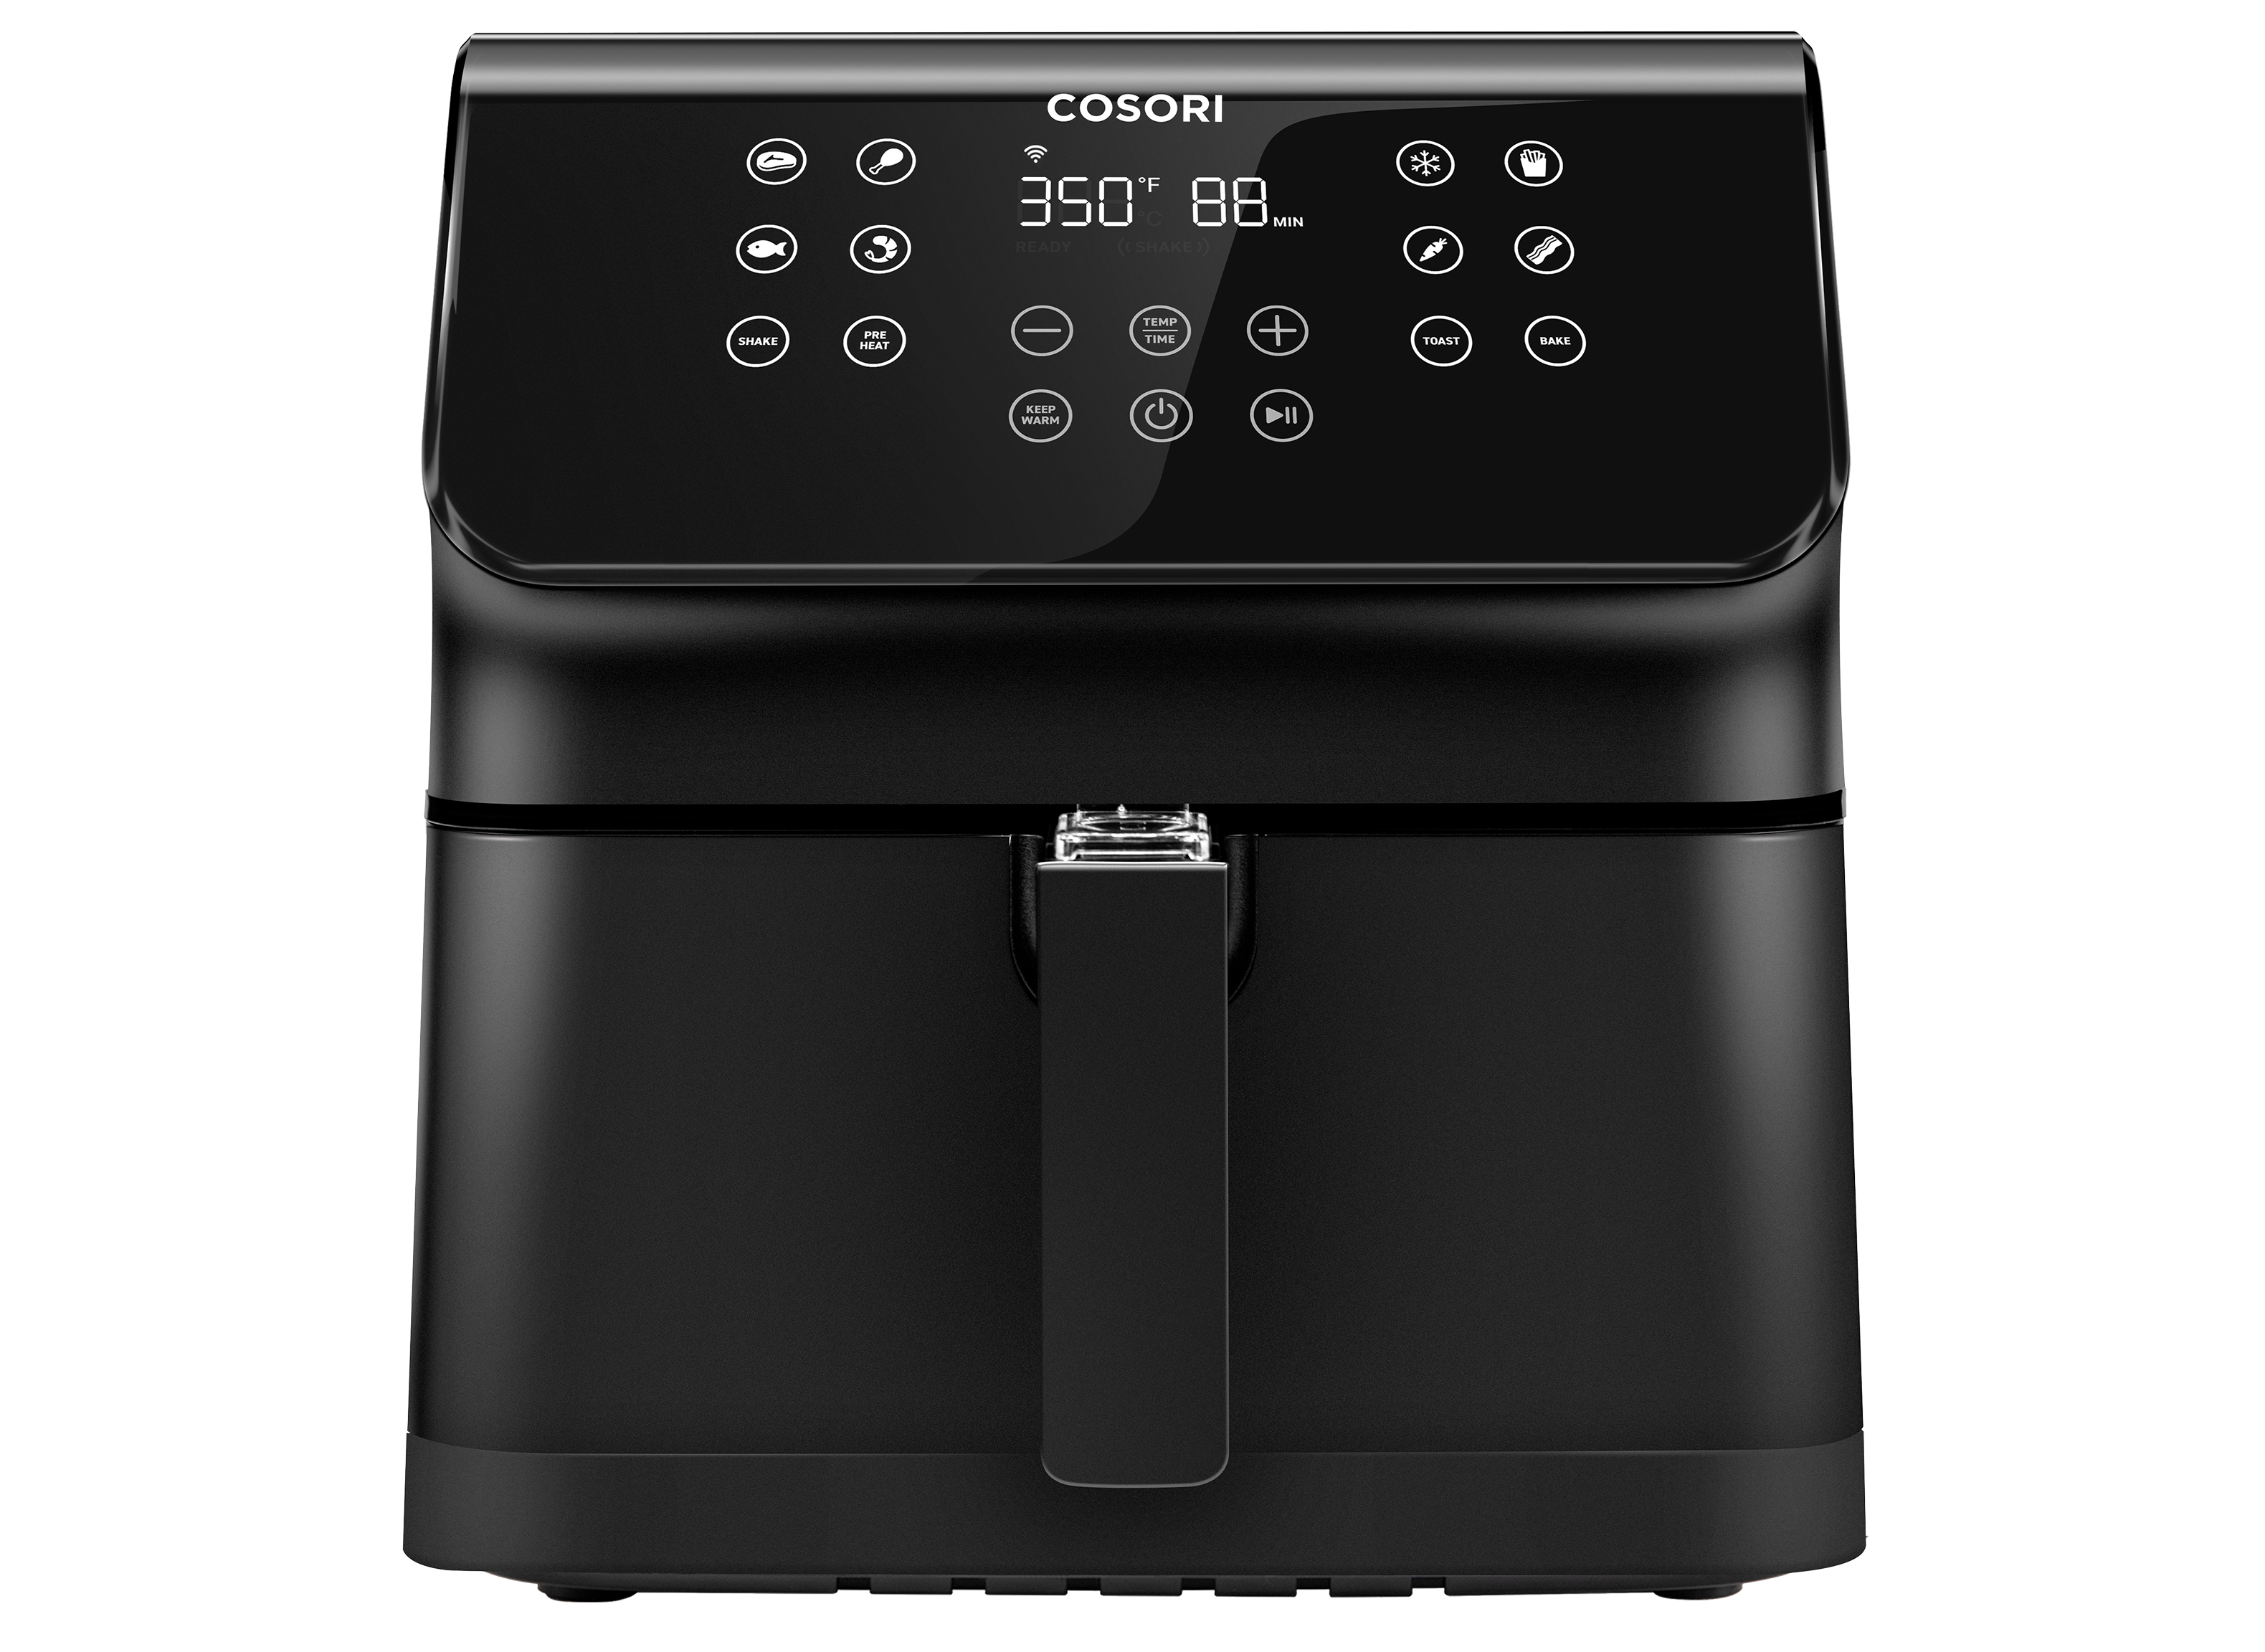 https://crdms.images.consumerreports.org/prod/products/cr/models/407554-air-fryers-cosori-pro-xls-ii-smart-5-8-quart-air-fryer-with-pizza-pan-10031565.png